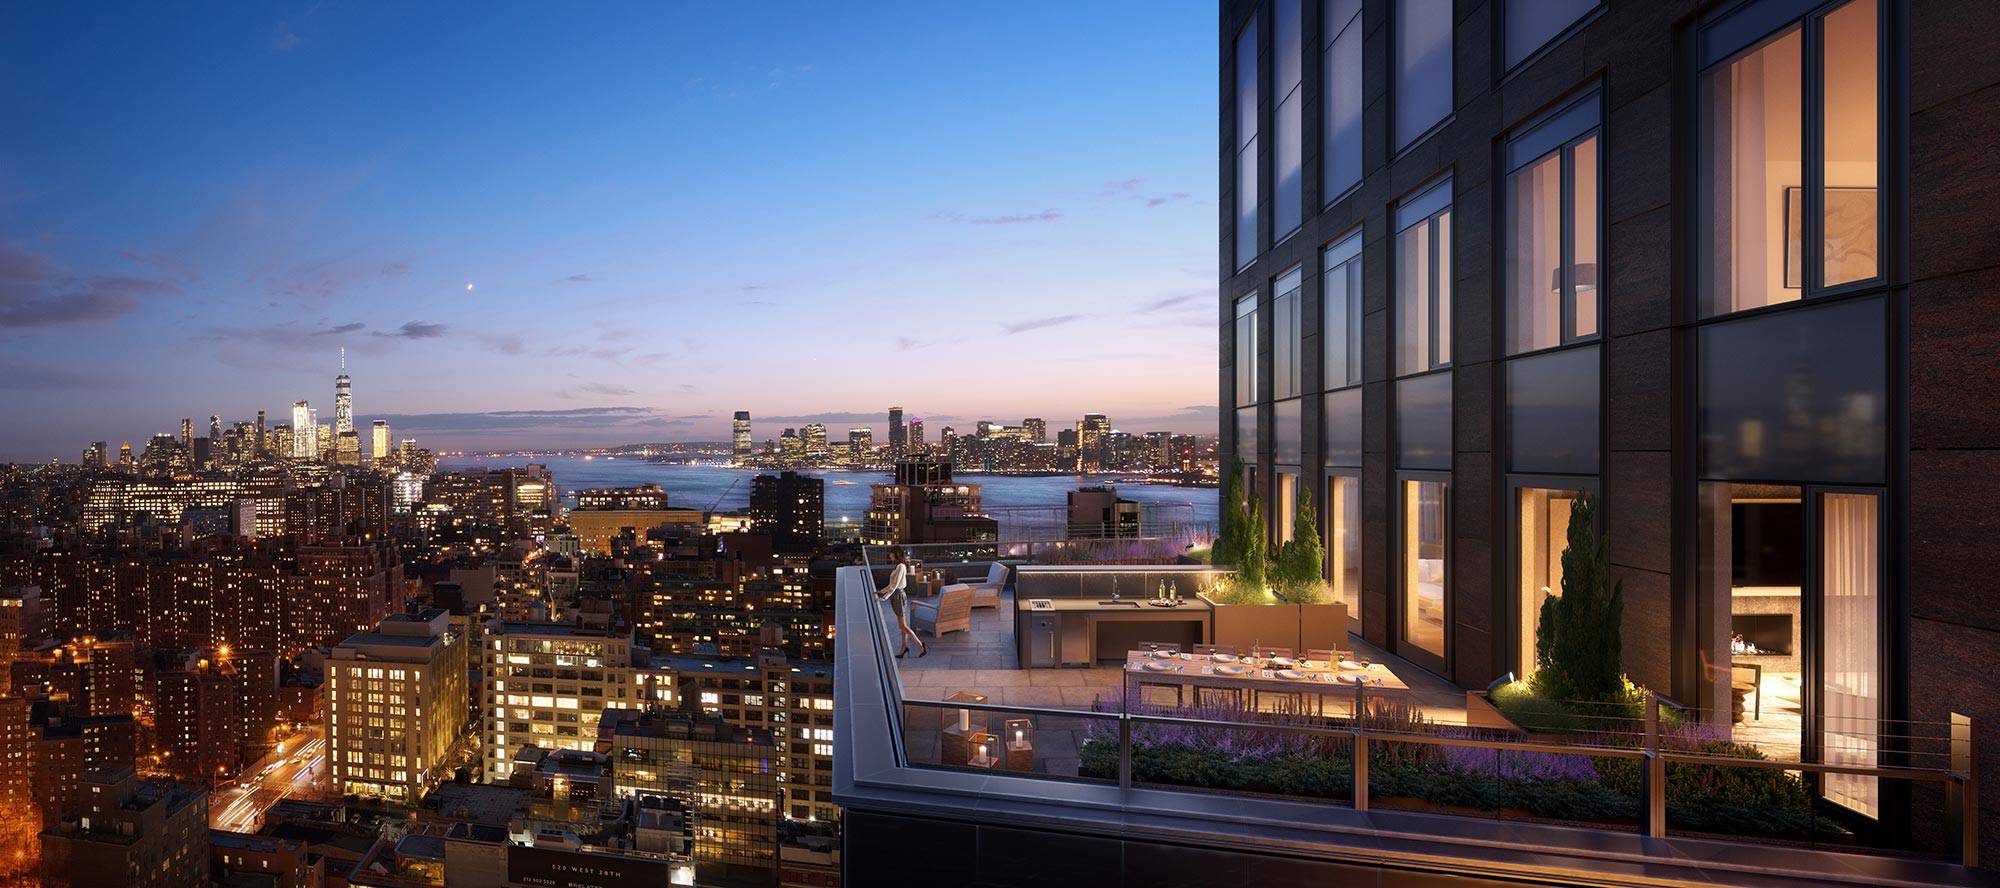 NO FEE! STUNNING 2 BEDROOM, LUXURY BUILDING, BOWLING ALLEY, POOL, SUN & BBQ TERRACE, EQUINOX FITNESS CENTER!! HUDSON YARDS!!!